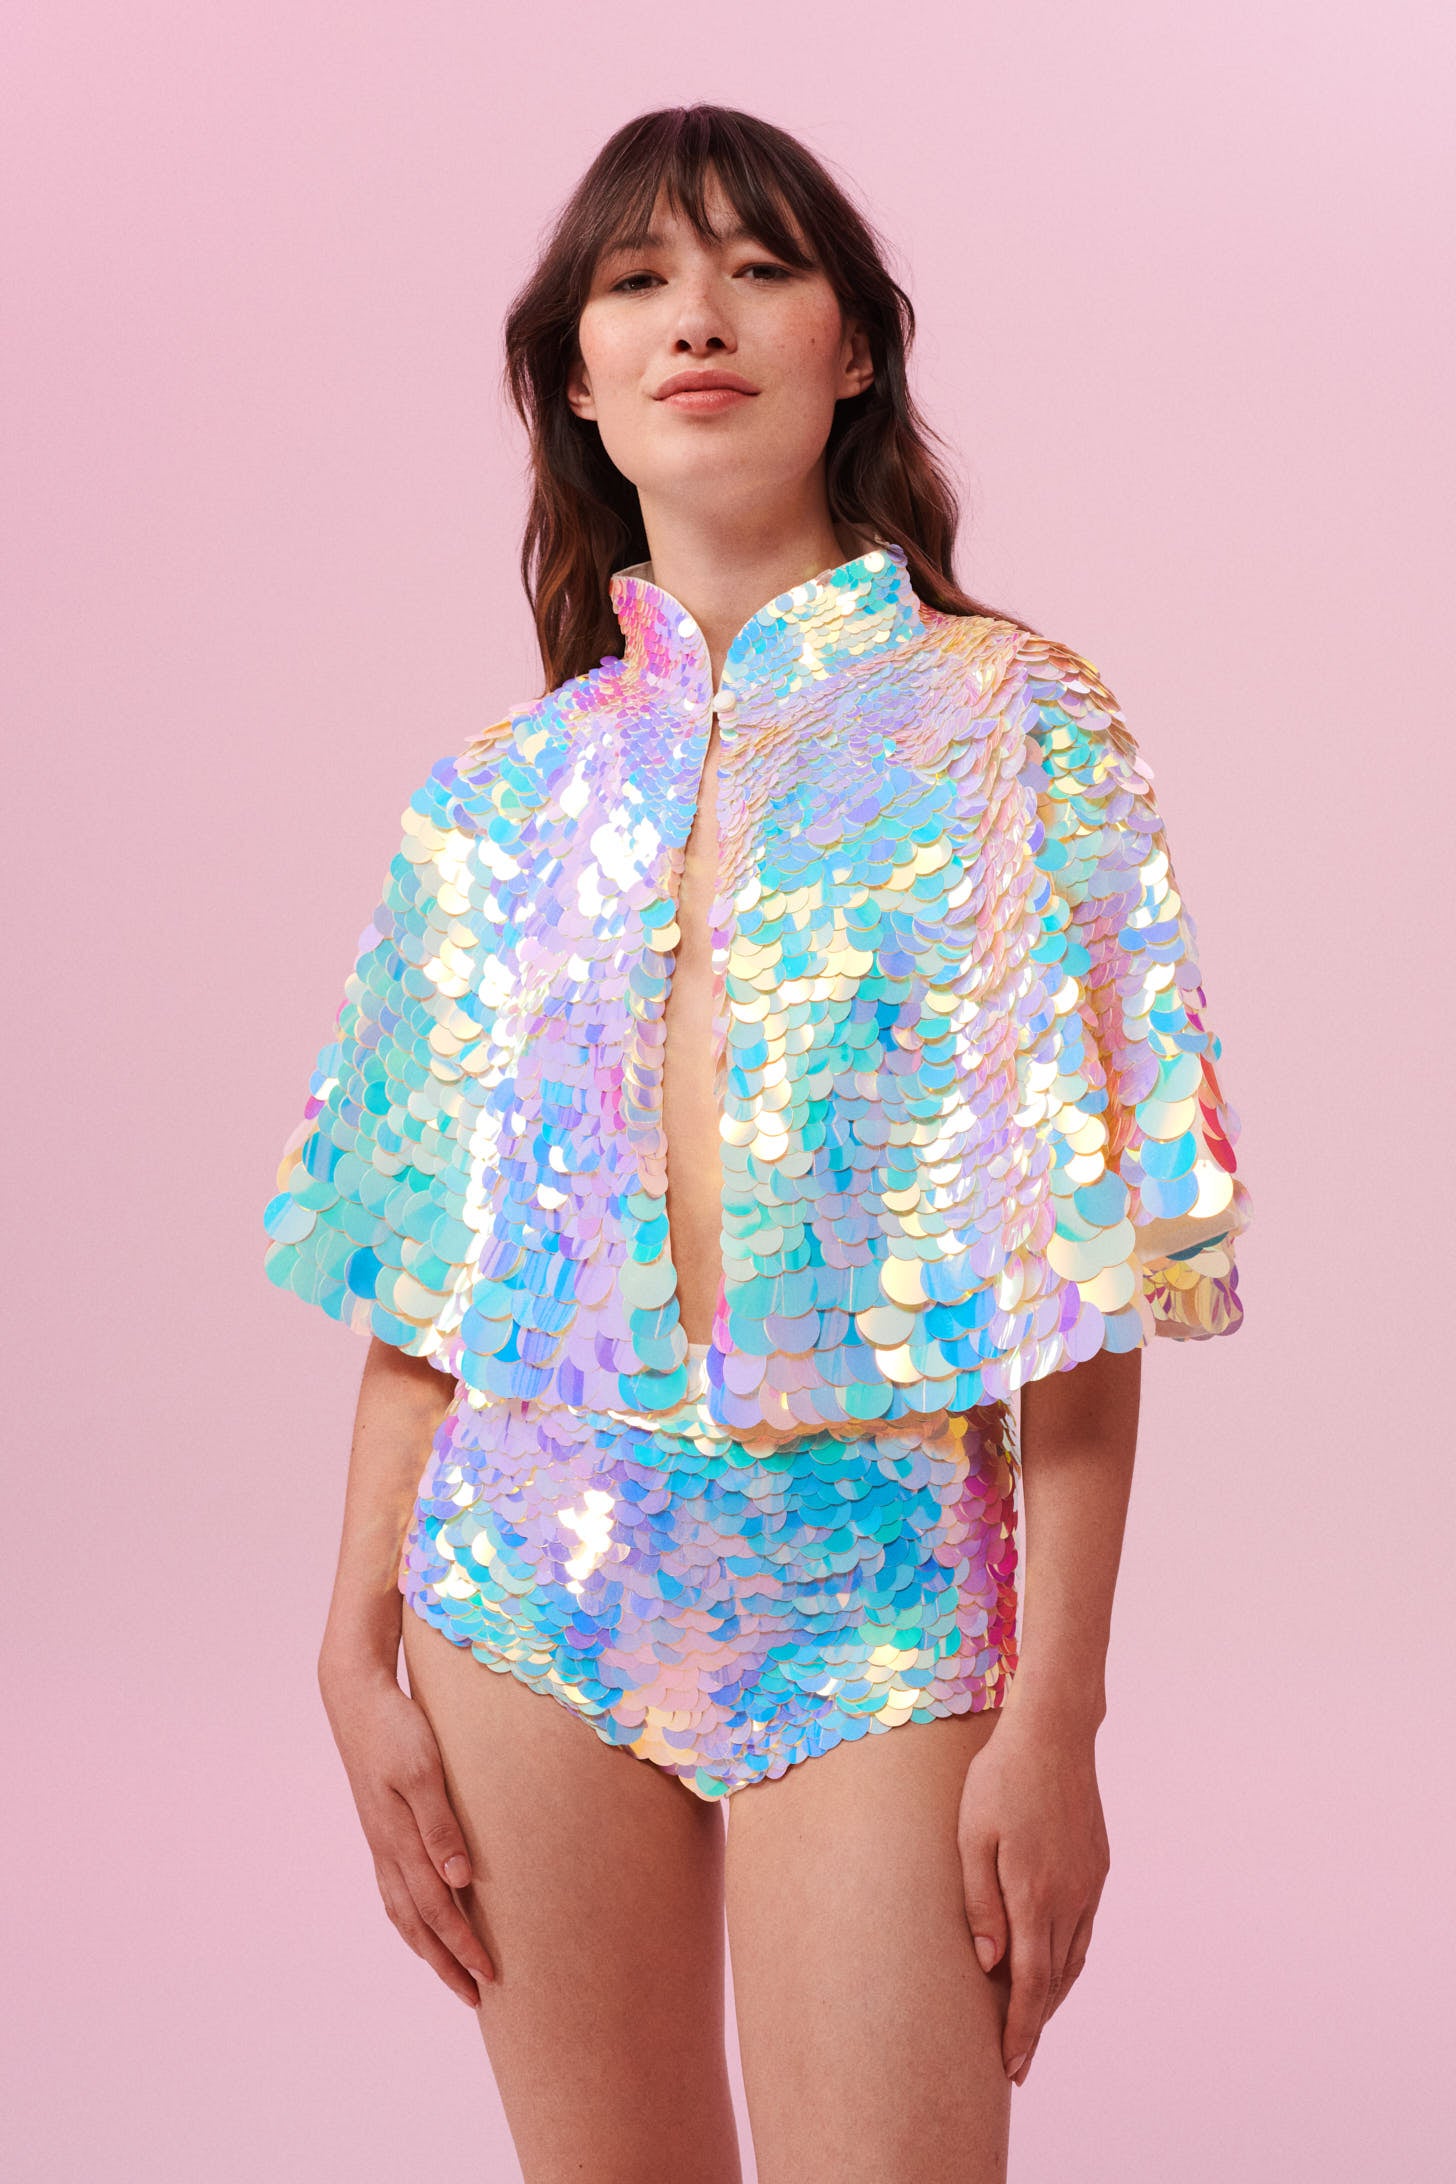 A woman long brown hair with a fringe, swept back wearing an opal sequin high knecked cape and short sequin hot pant shorts covered in large round holographic purple, pink, blue and white coloured Rosa Bloom sequins. The sequins glisten, creating a mix of shimmering colours of pink, blue, lilac and white.